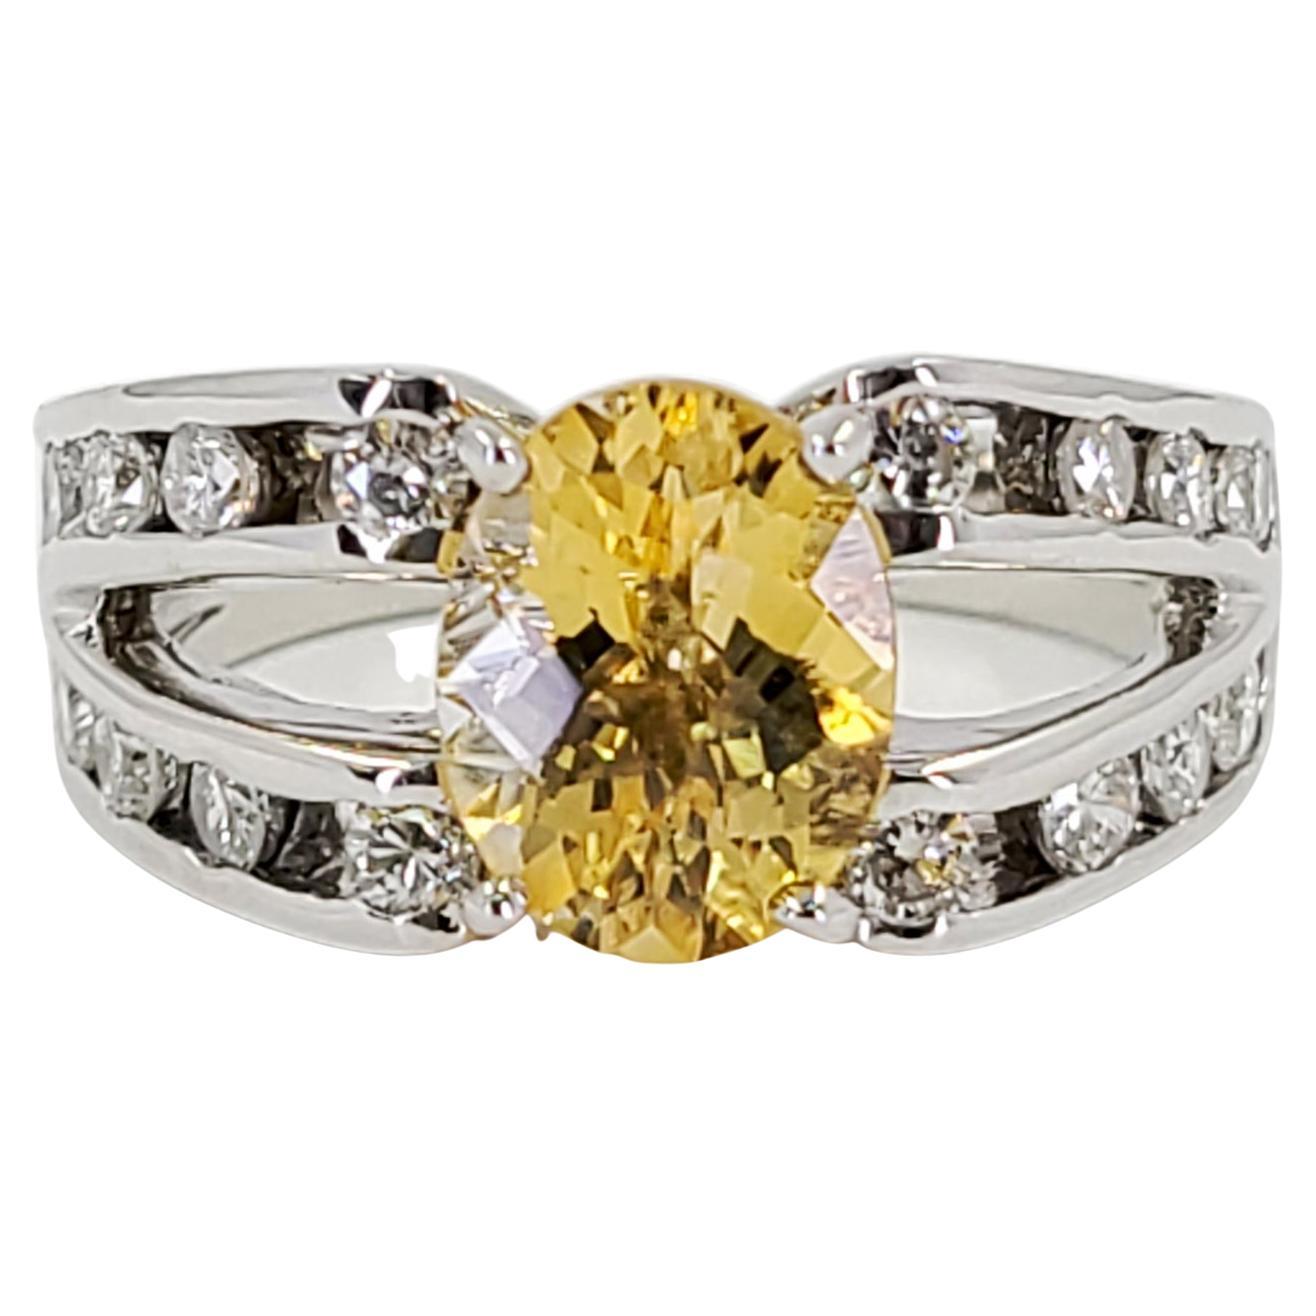 White Gold, Diamond and Citrine Ring For Sale